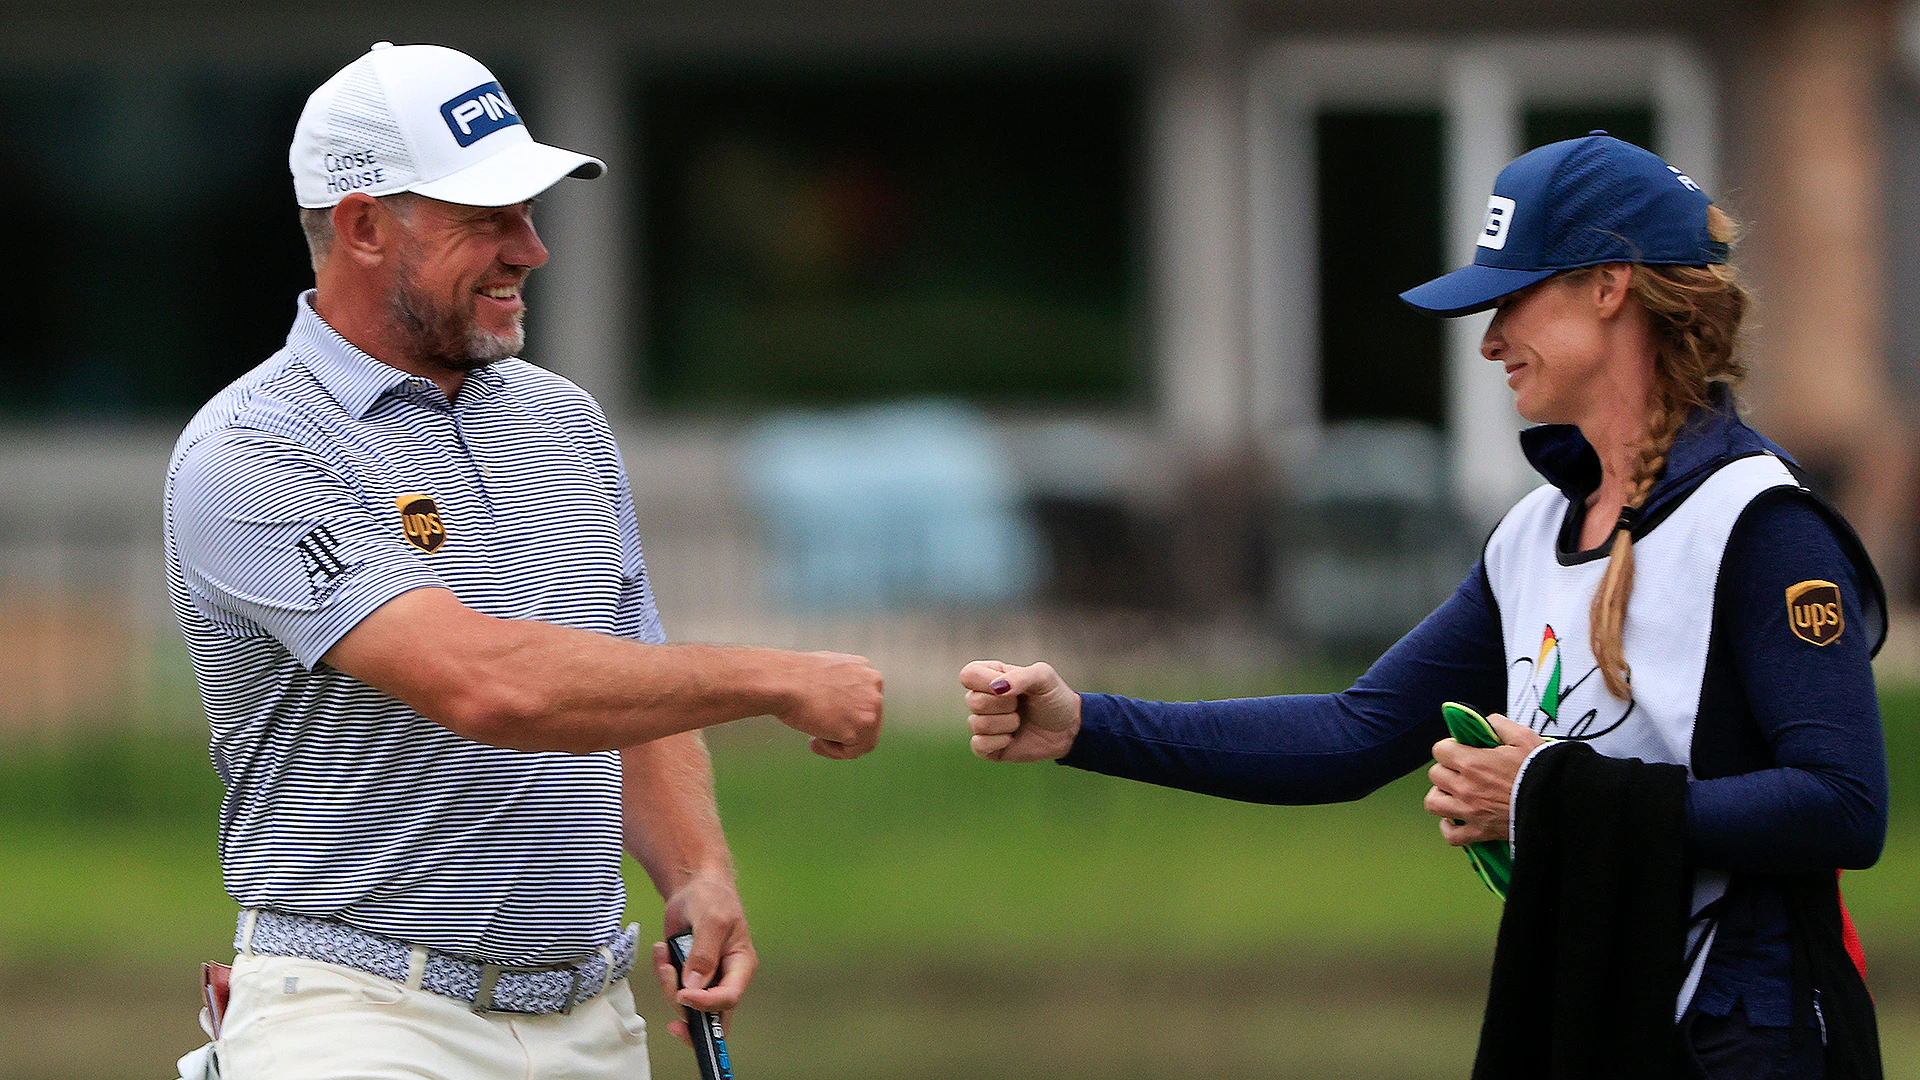 Lee Westwood leads Bryson DeChambeau, Corey Conners by one at Bay Hill